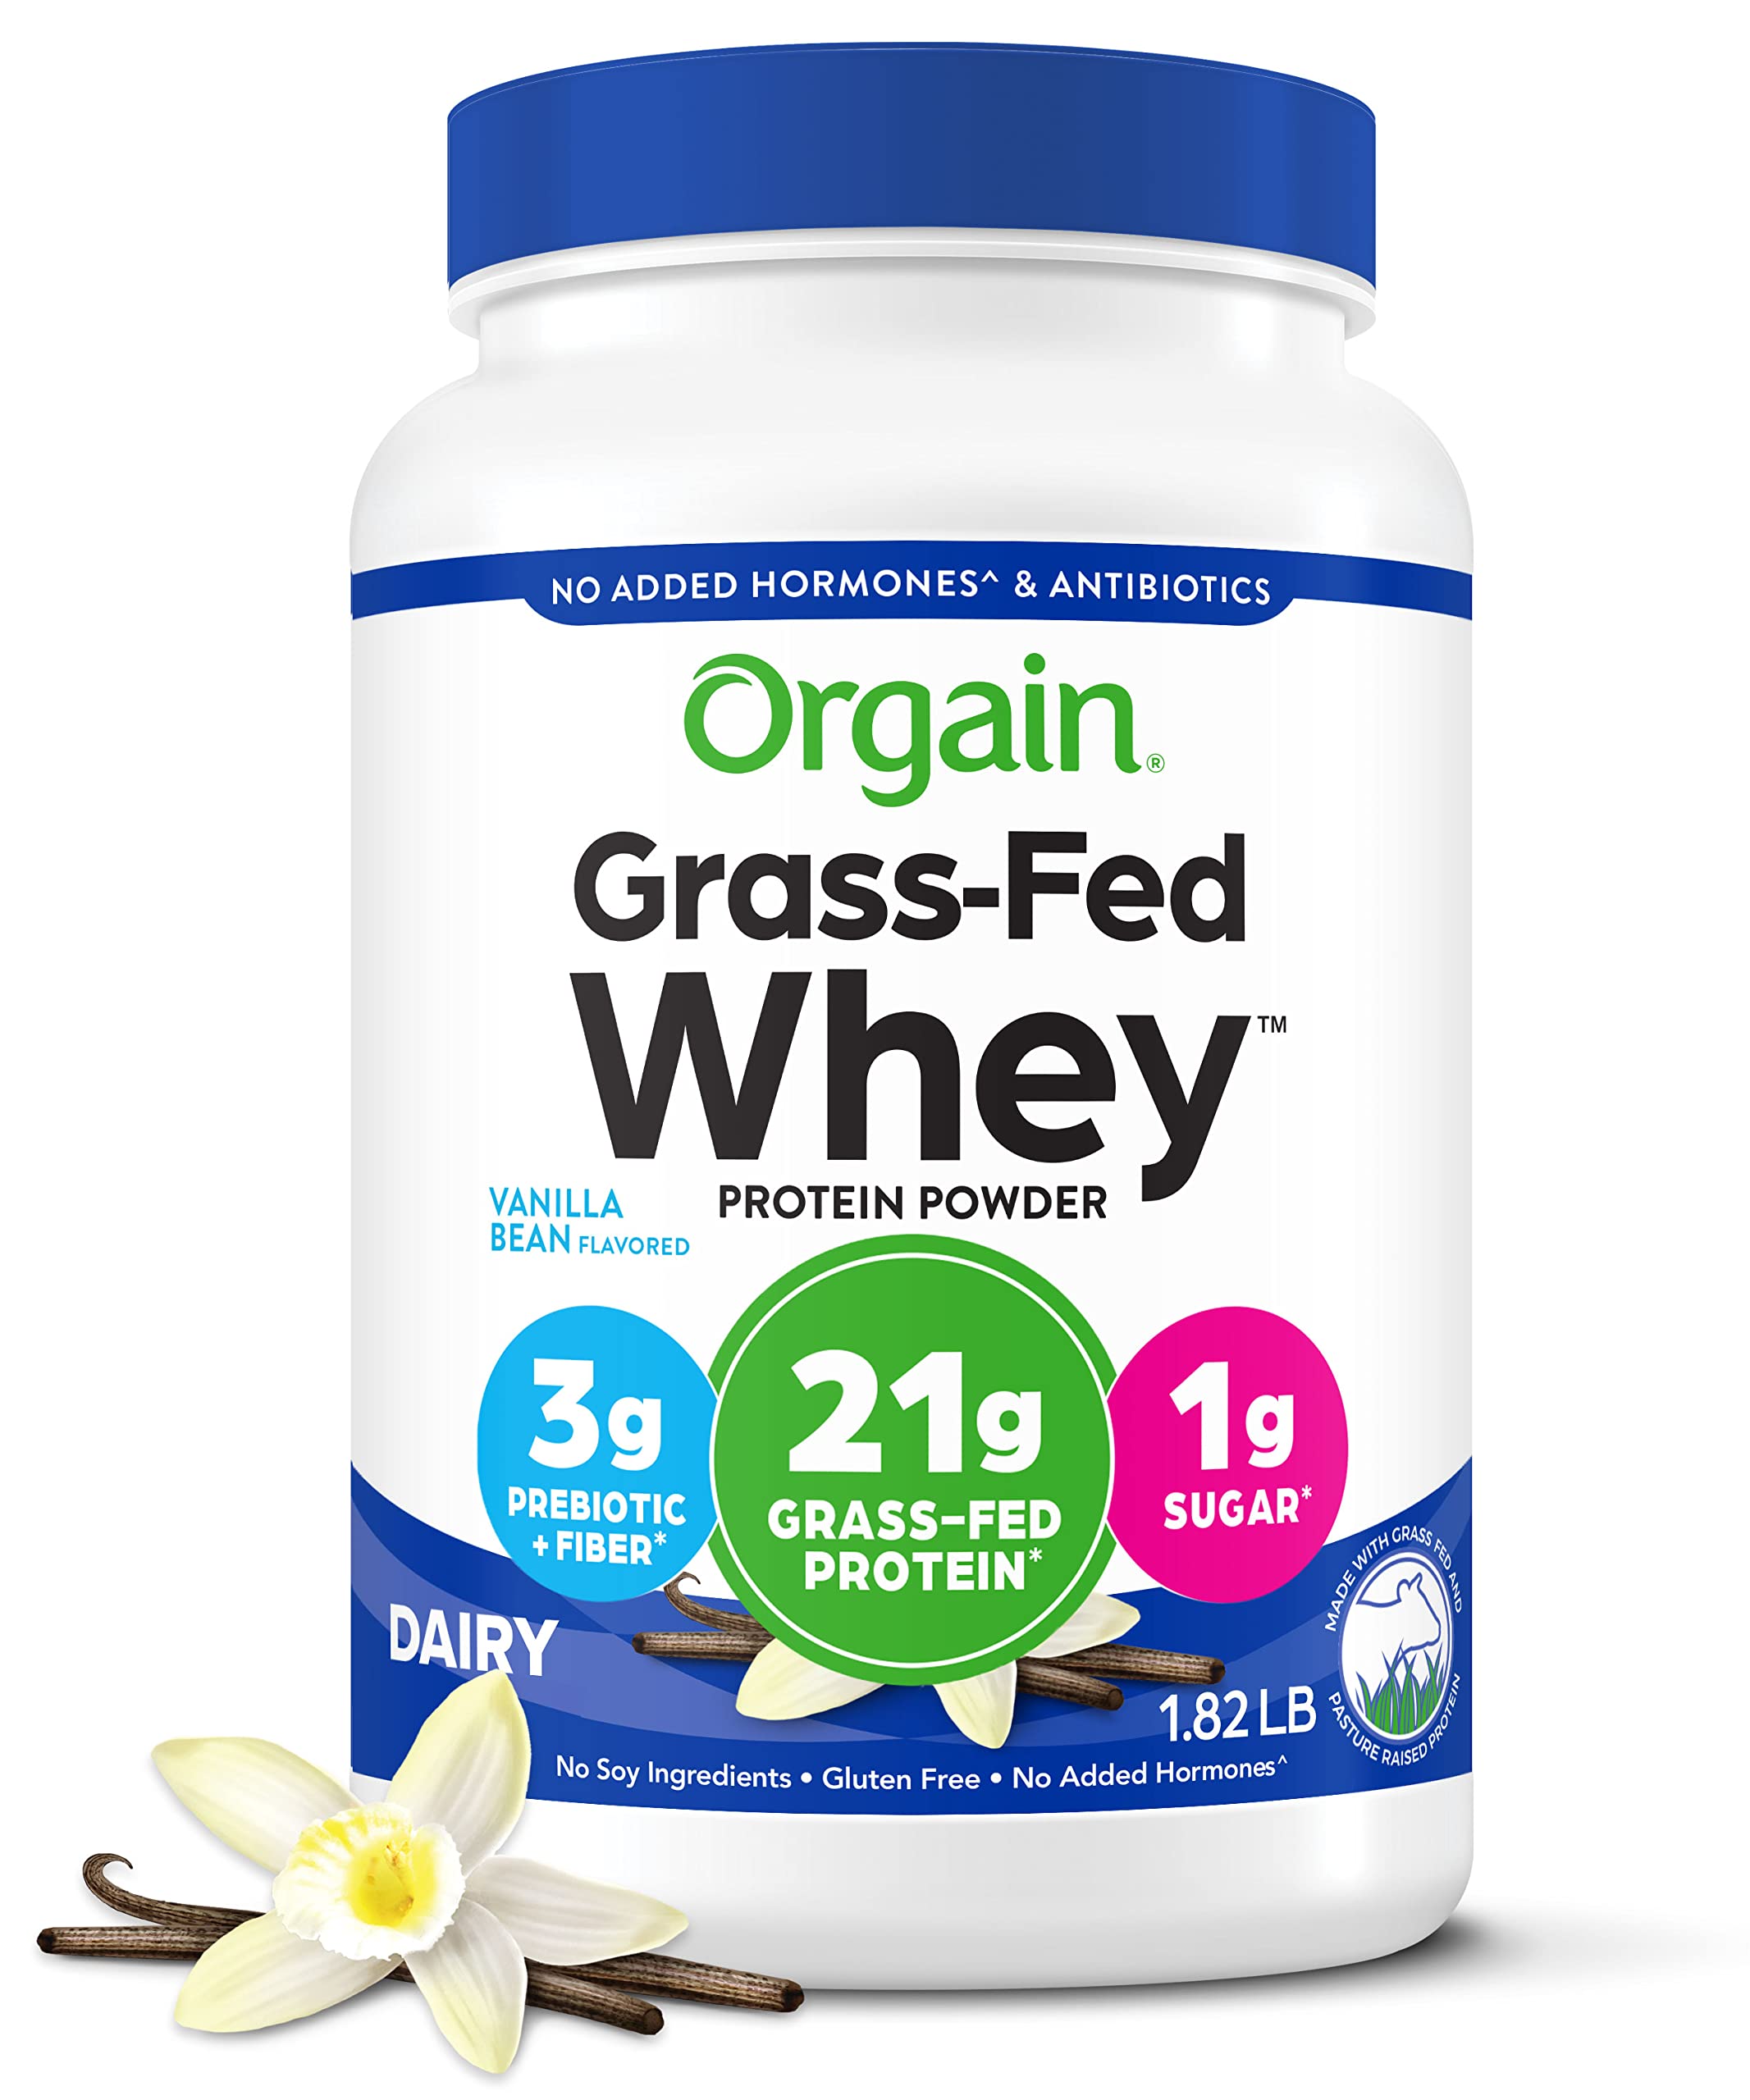 Orgain Whey Protein Powder, Vanilla Bean - 21g Grass Fed Dairy Protein, Gluten Free, Soy Free, No Sugar Added, Kosher, No Added Hormones or Carrageenan, For Smoothies & Shakes - 1.82lb